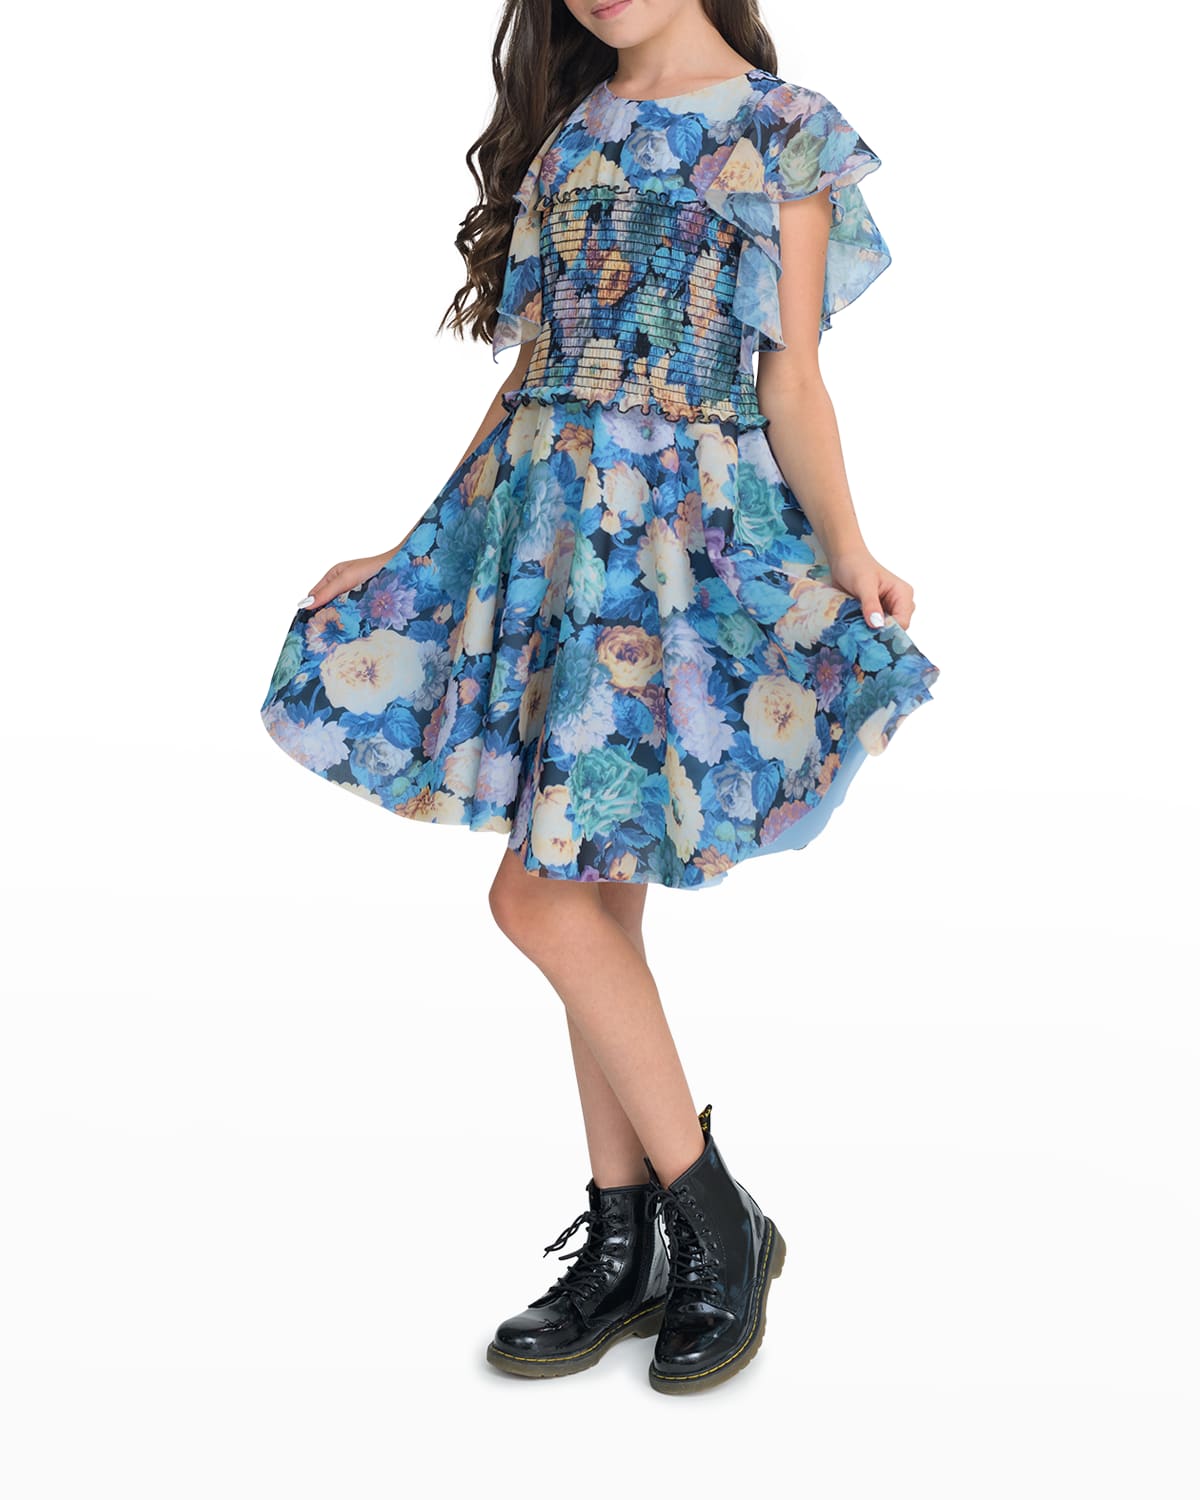 Girls Butterfly Denim Floral Lace Sleeveless Strappy Party Dresses 2-11 Years